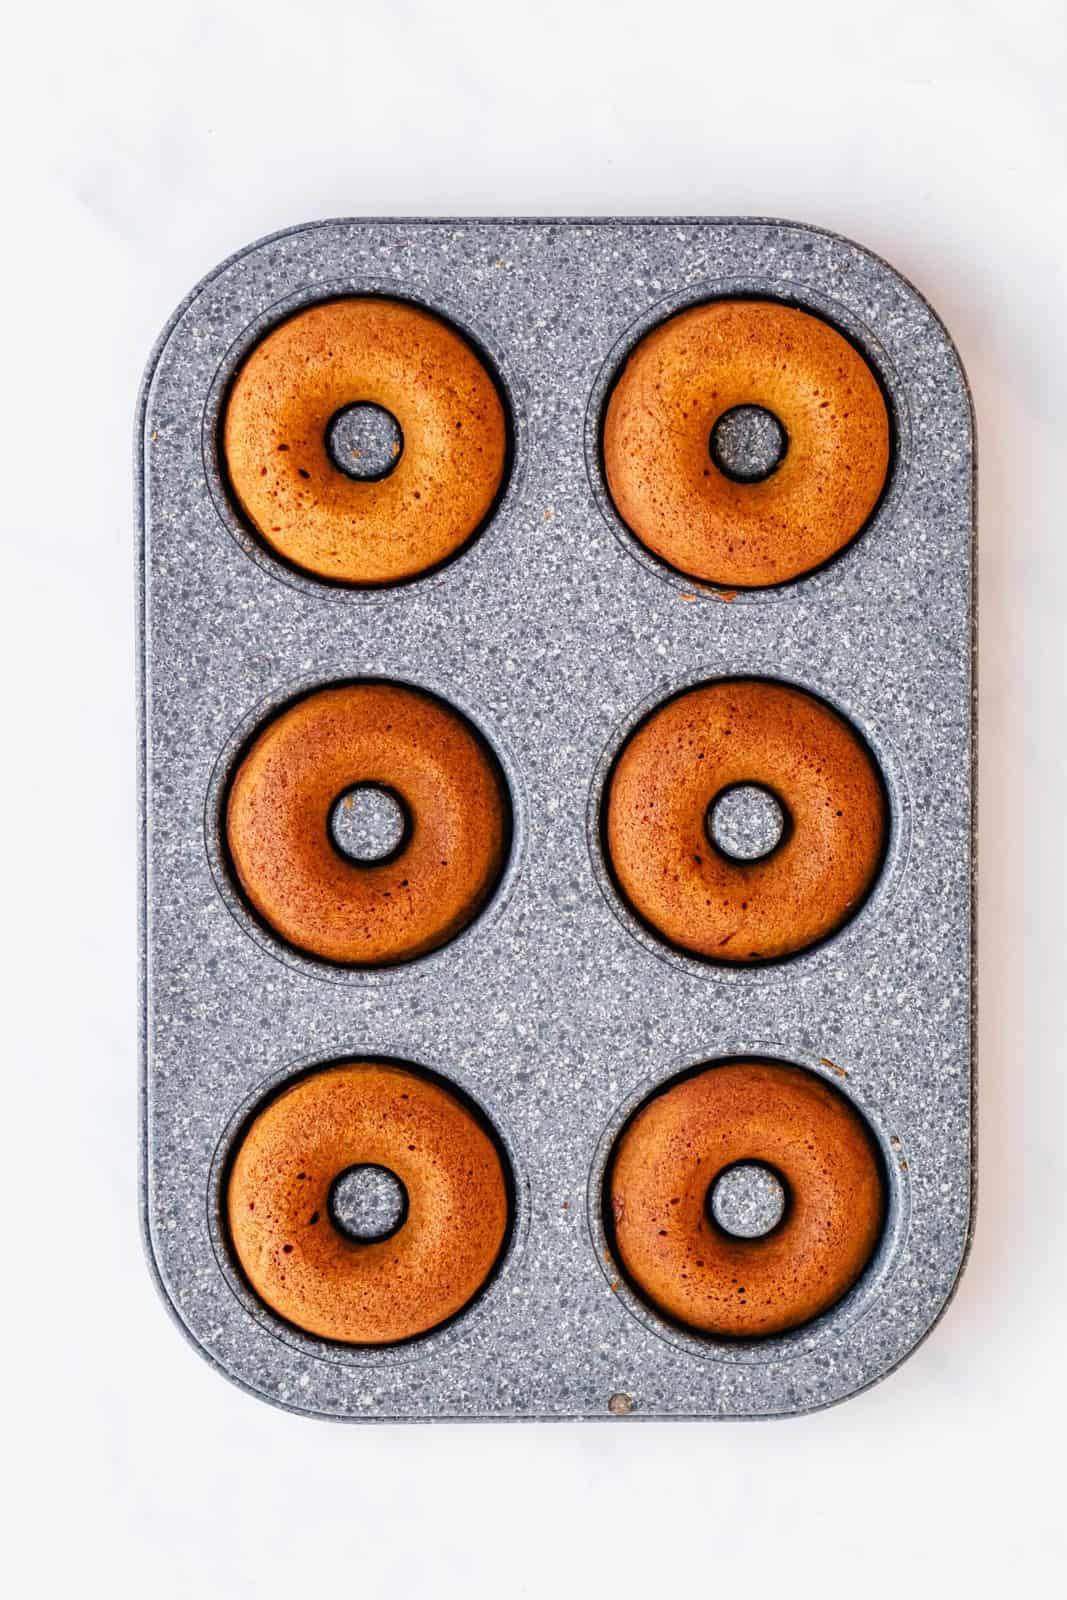 Baked donuts in muffin pan.